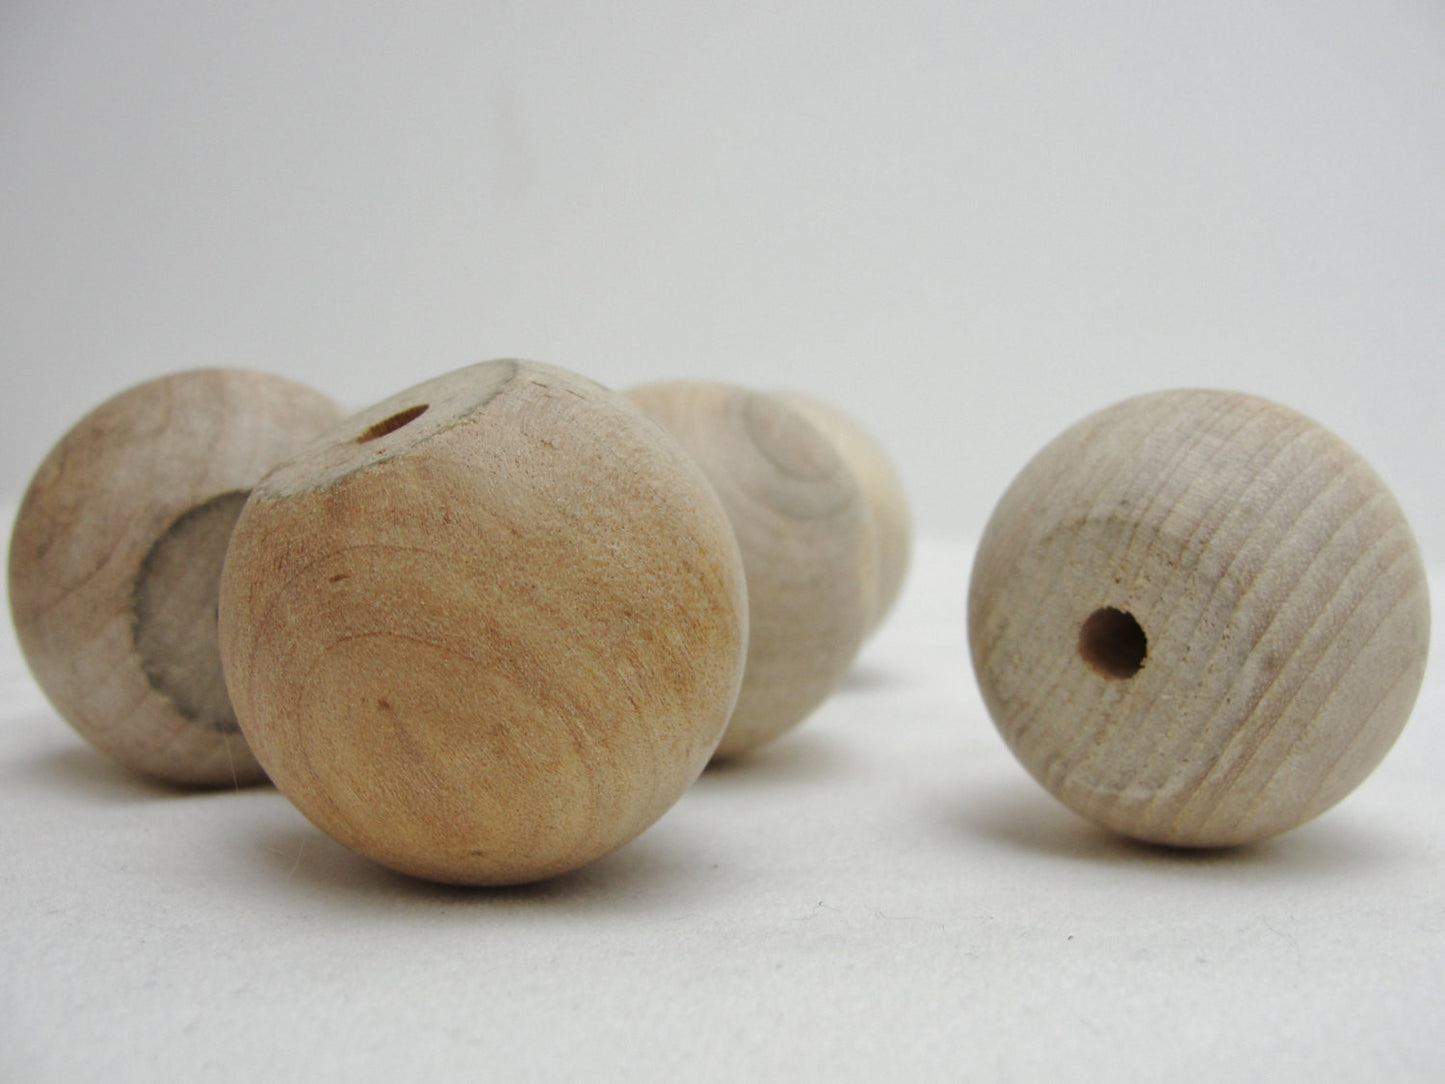 Wooden ball knob 1.5" (1 1/2") solid wood set of 6 - Wood parts - Craft Supply House